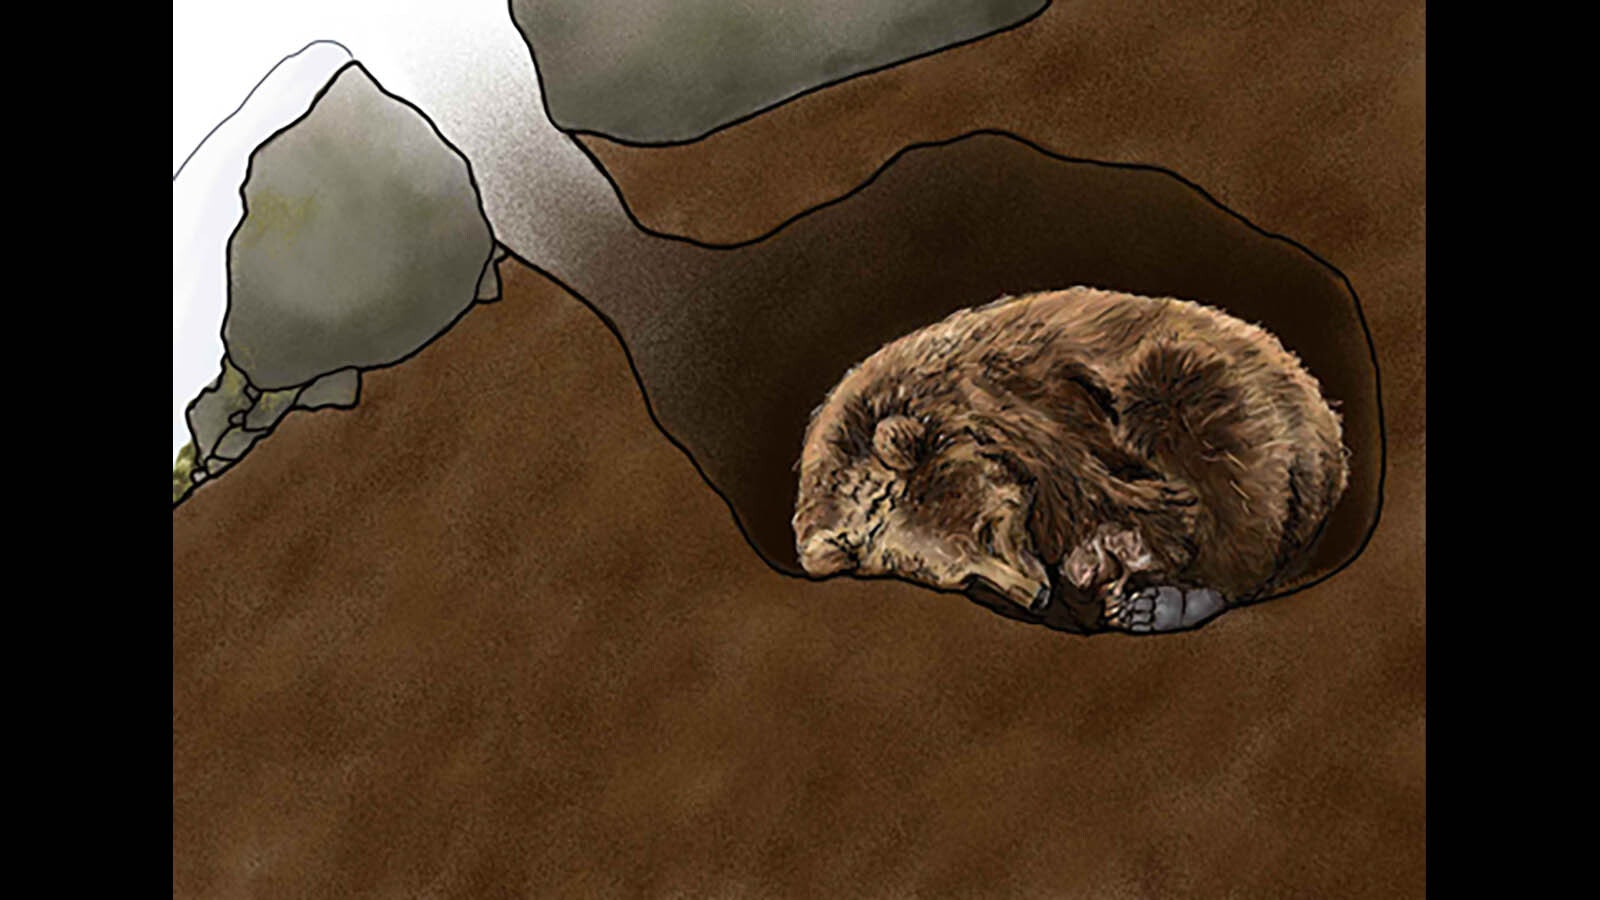 An illustration of a bear holed up in its winter den.